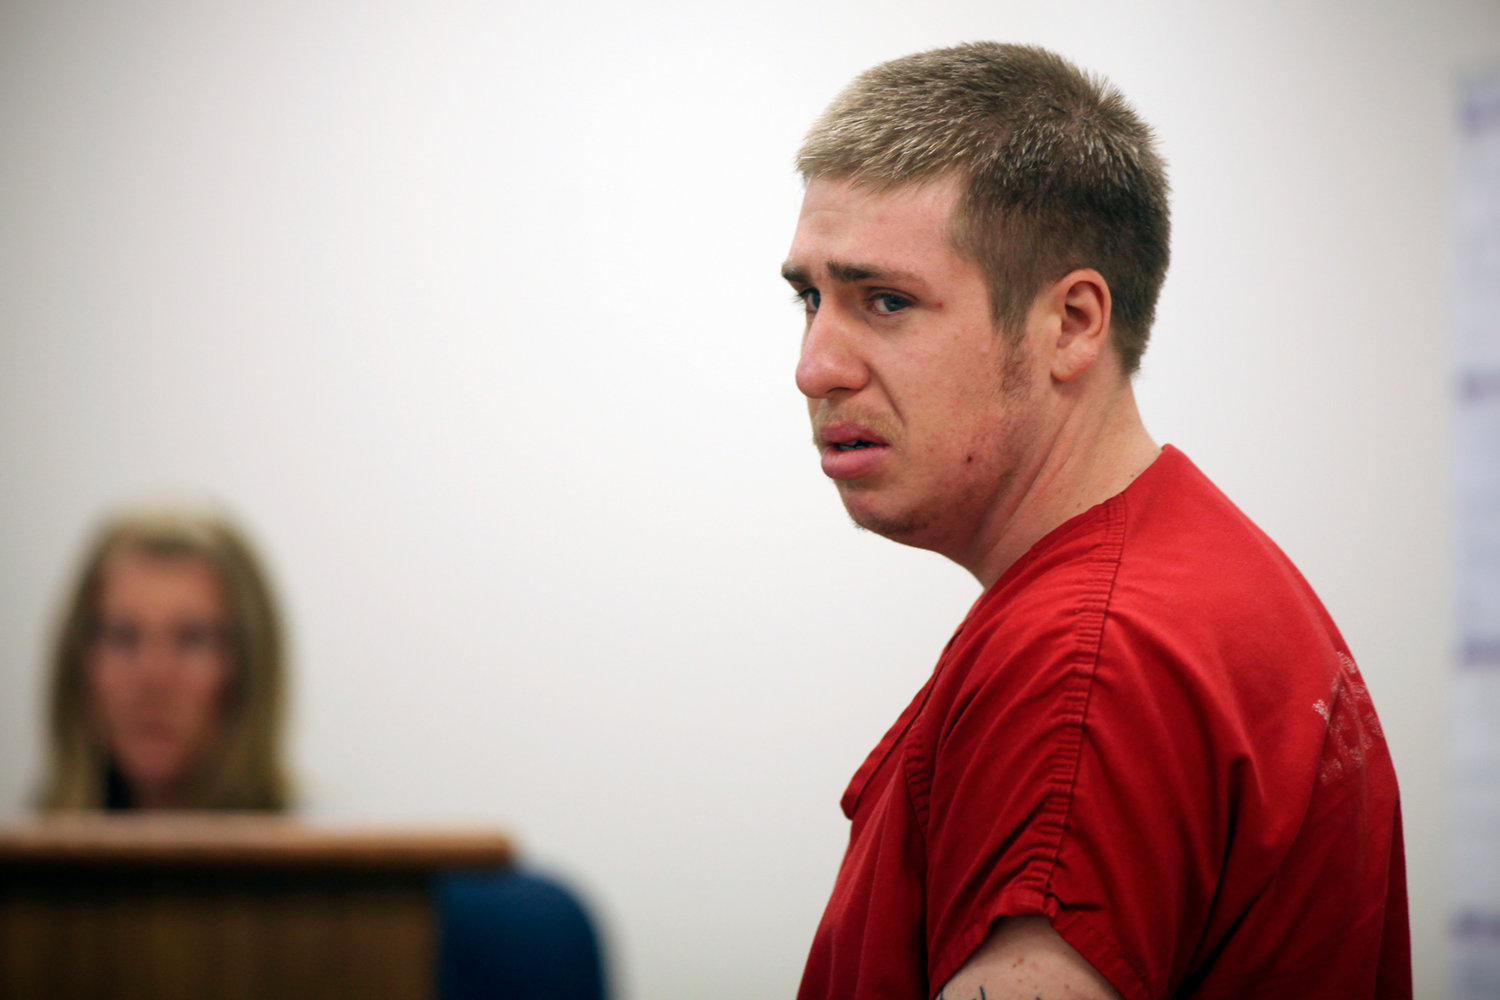 James Maurice Reeder looks towards family in the gallery following a preliminary hearing in Lewis County Superior Court Friday. He was arrested late Thursday night in connection with the death of his girlfriend's 2 1/2-year-old daughter, Koralynn Fister.